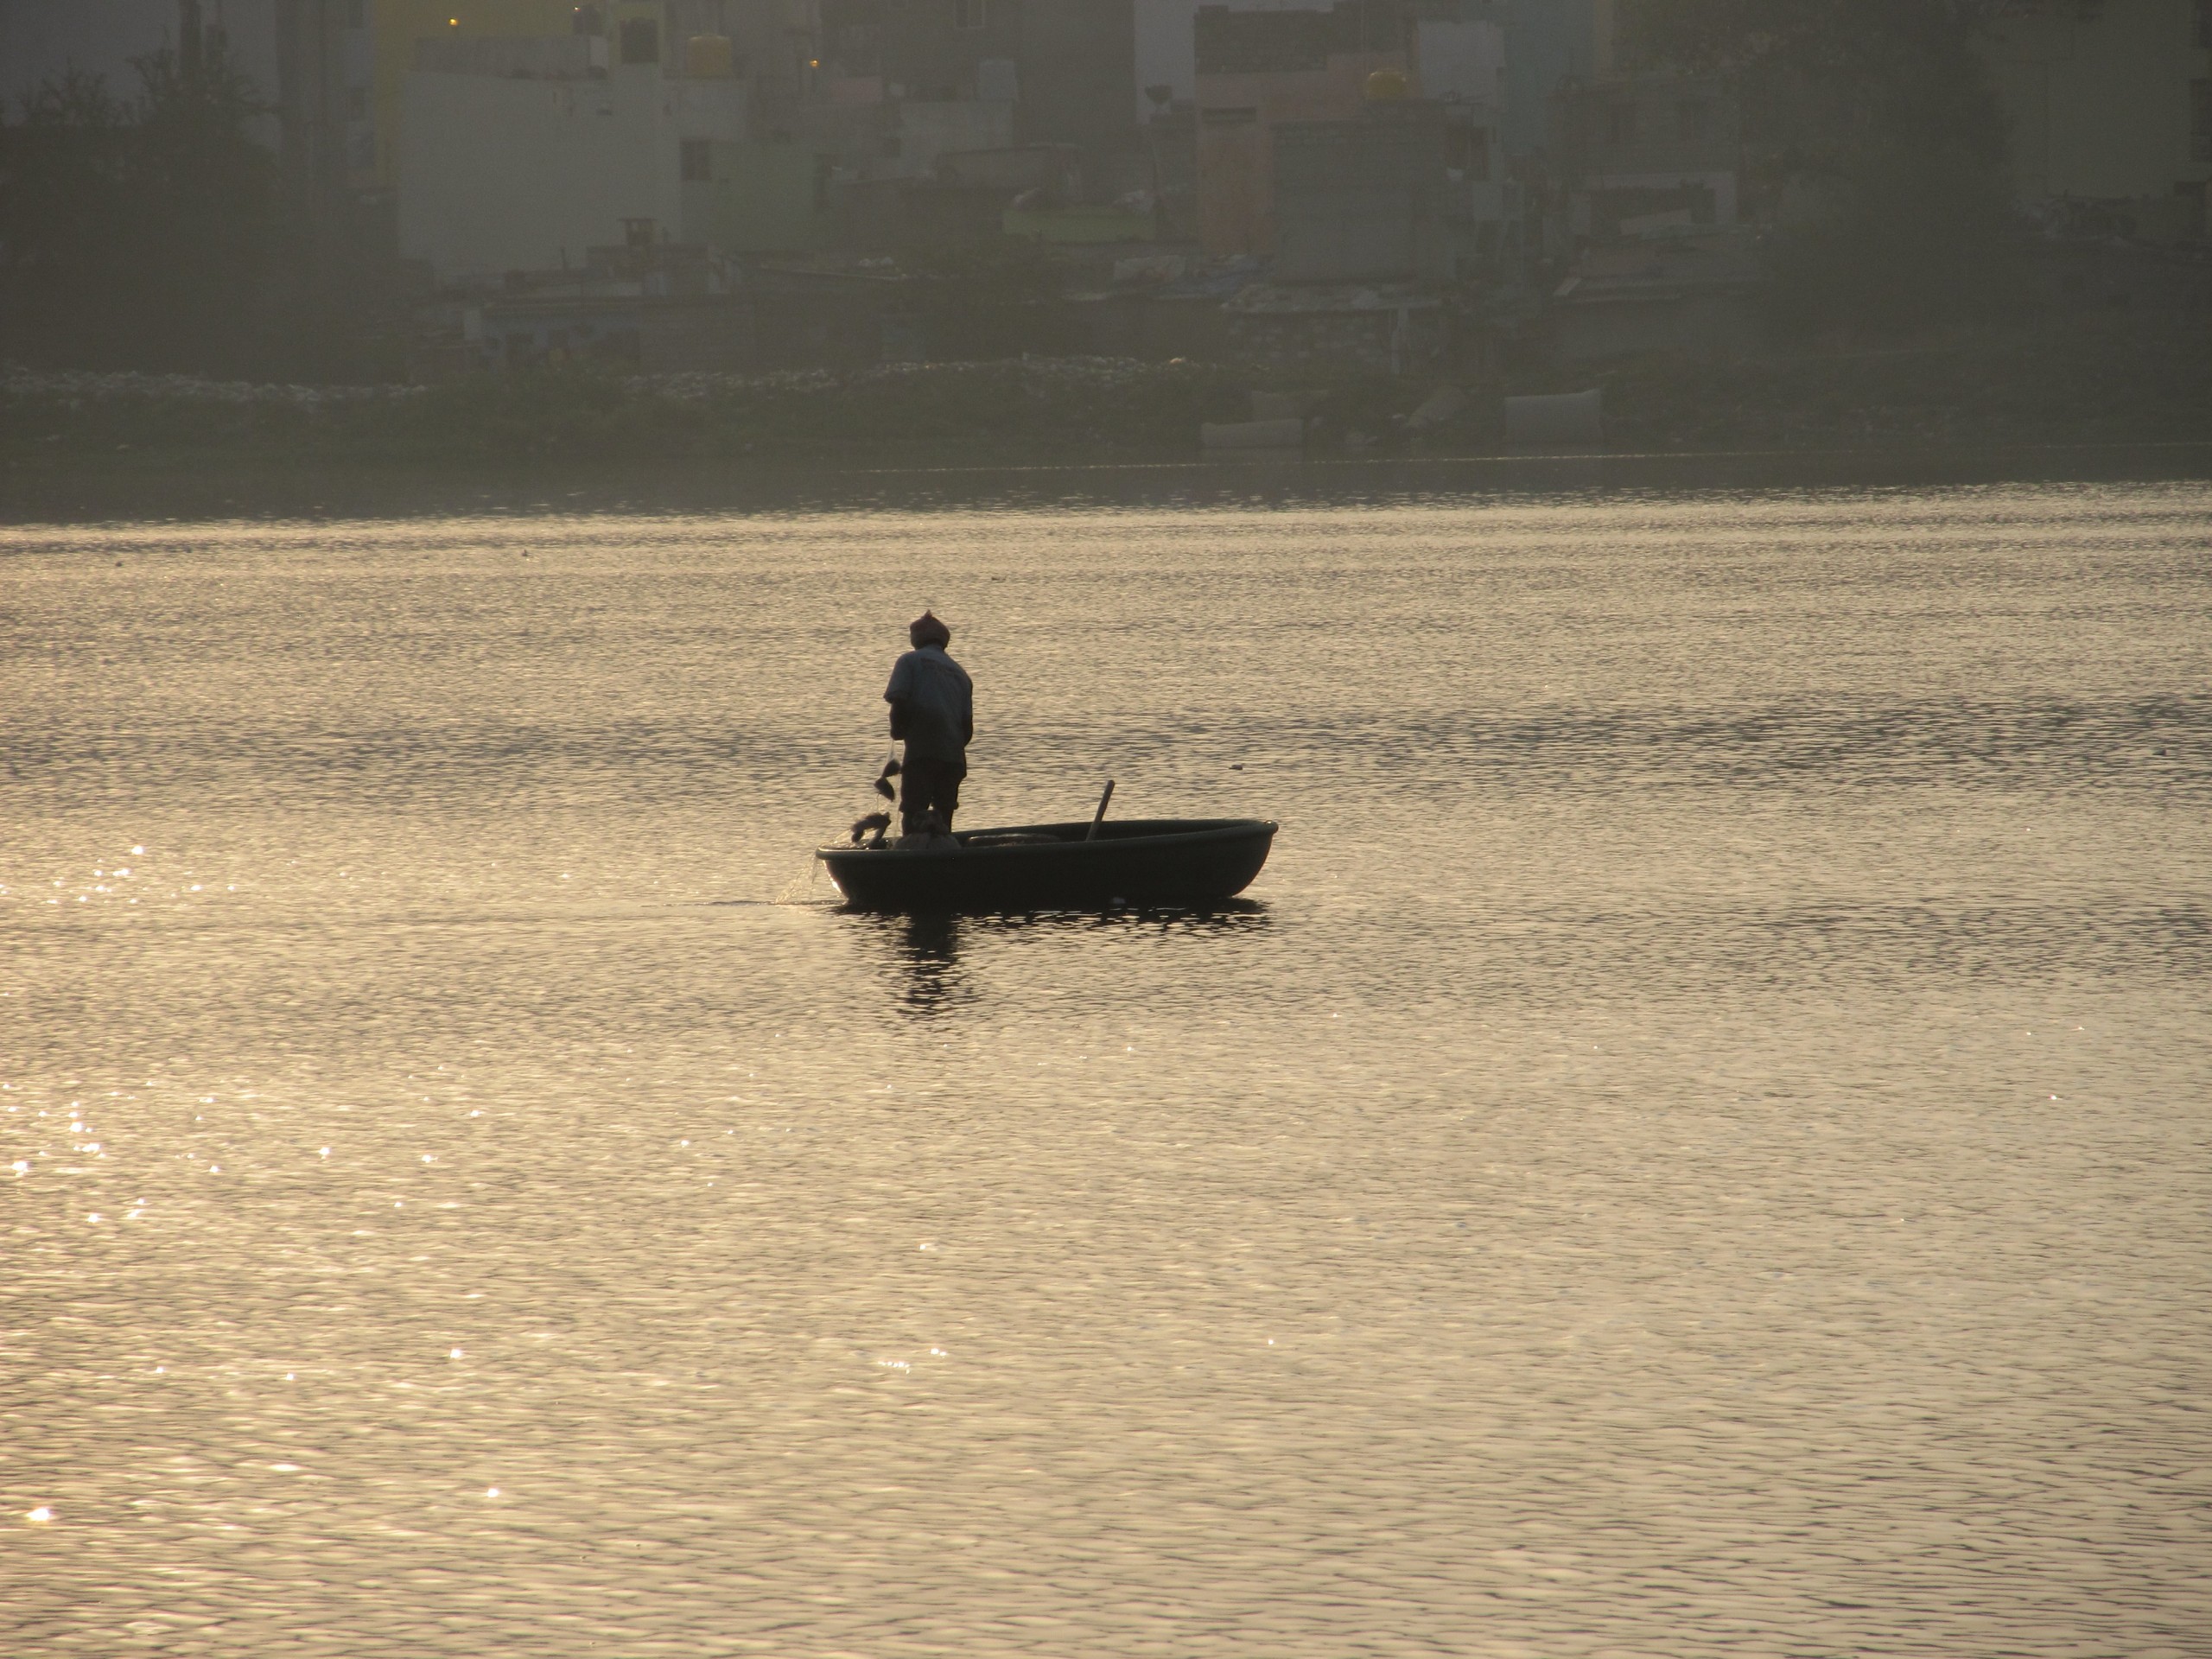 A fisherman in a boat